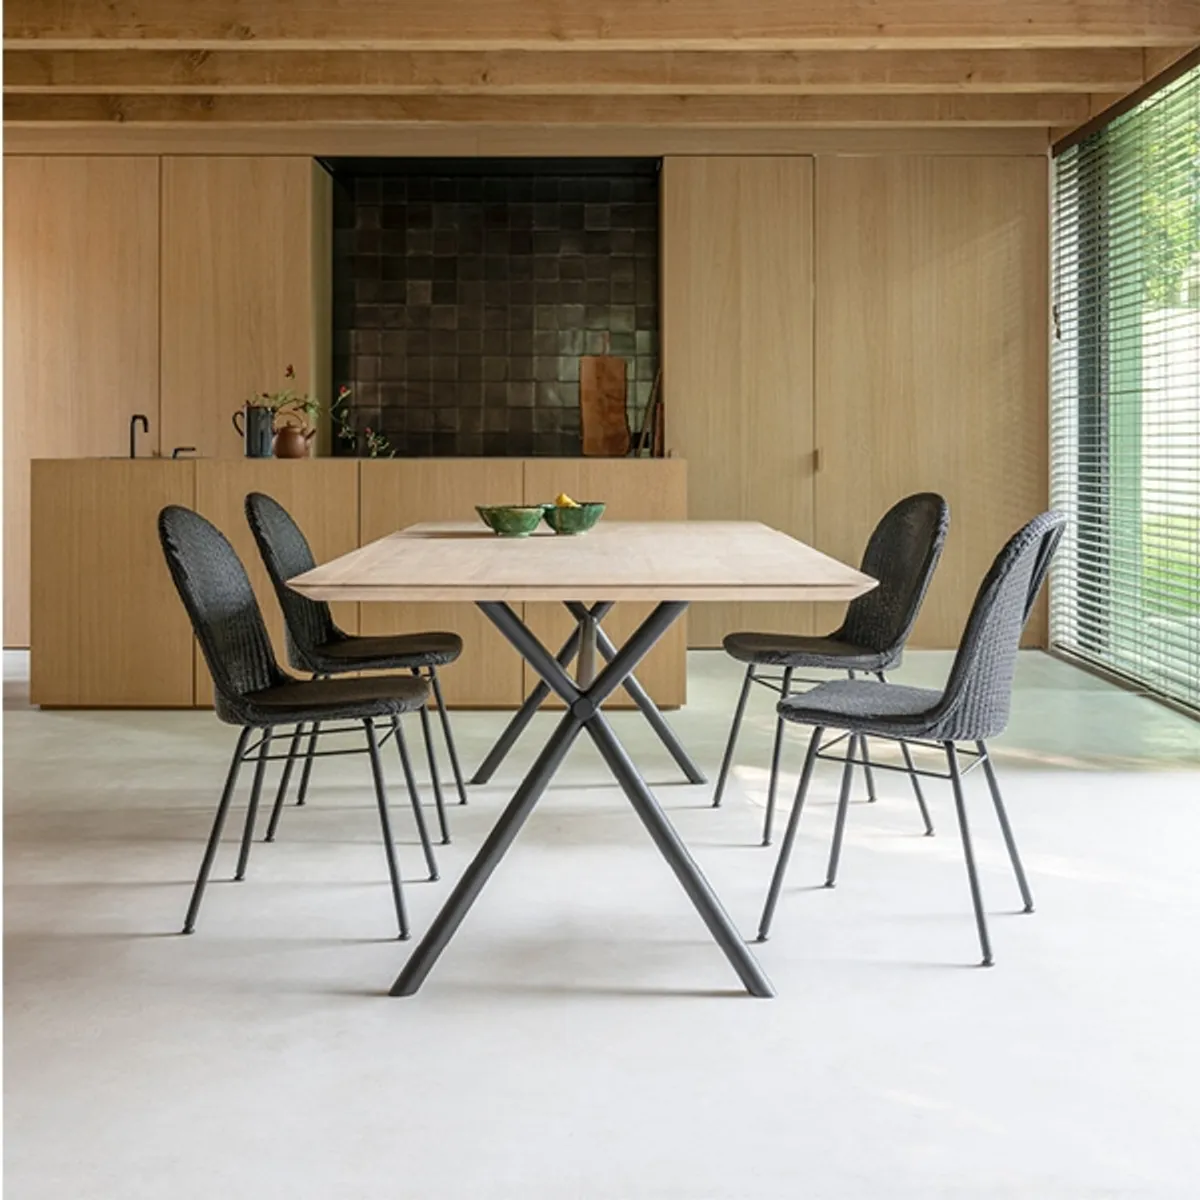 Elegantediningtable Inside Out Contracts3